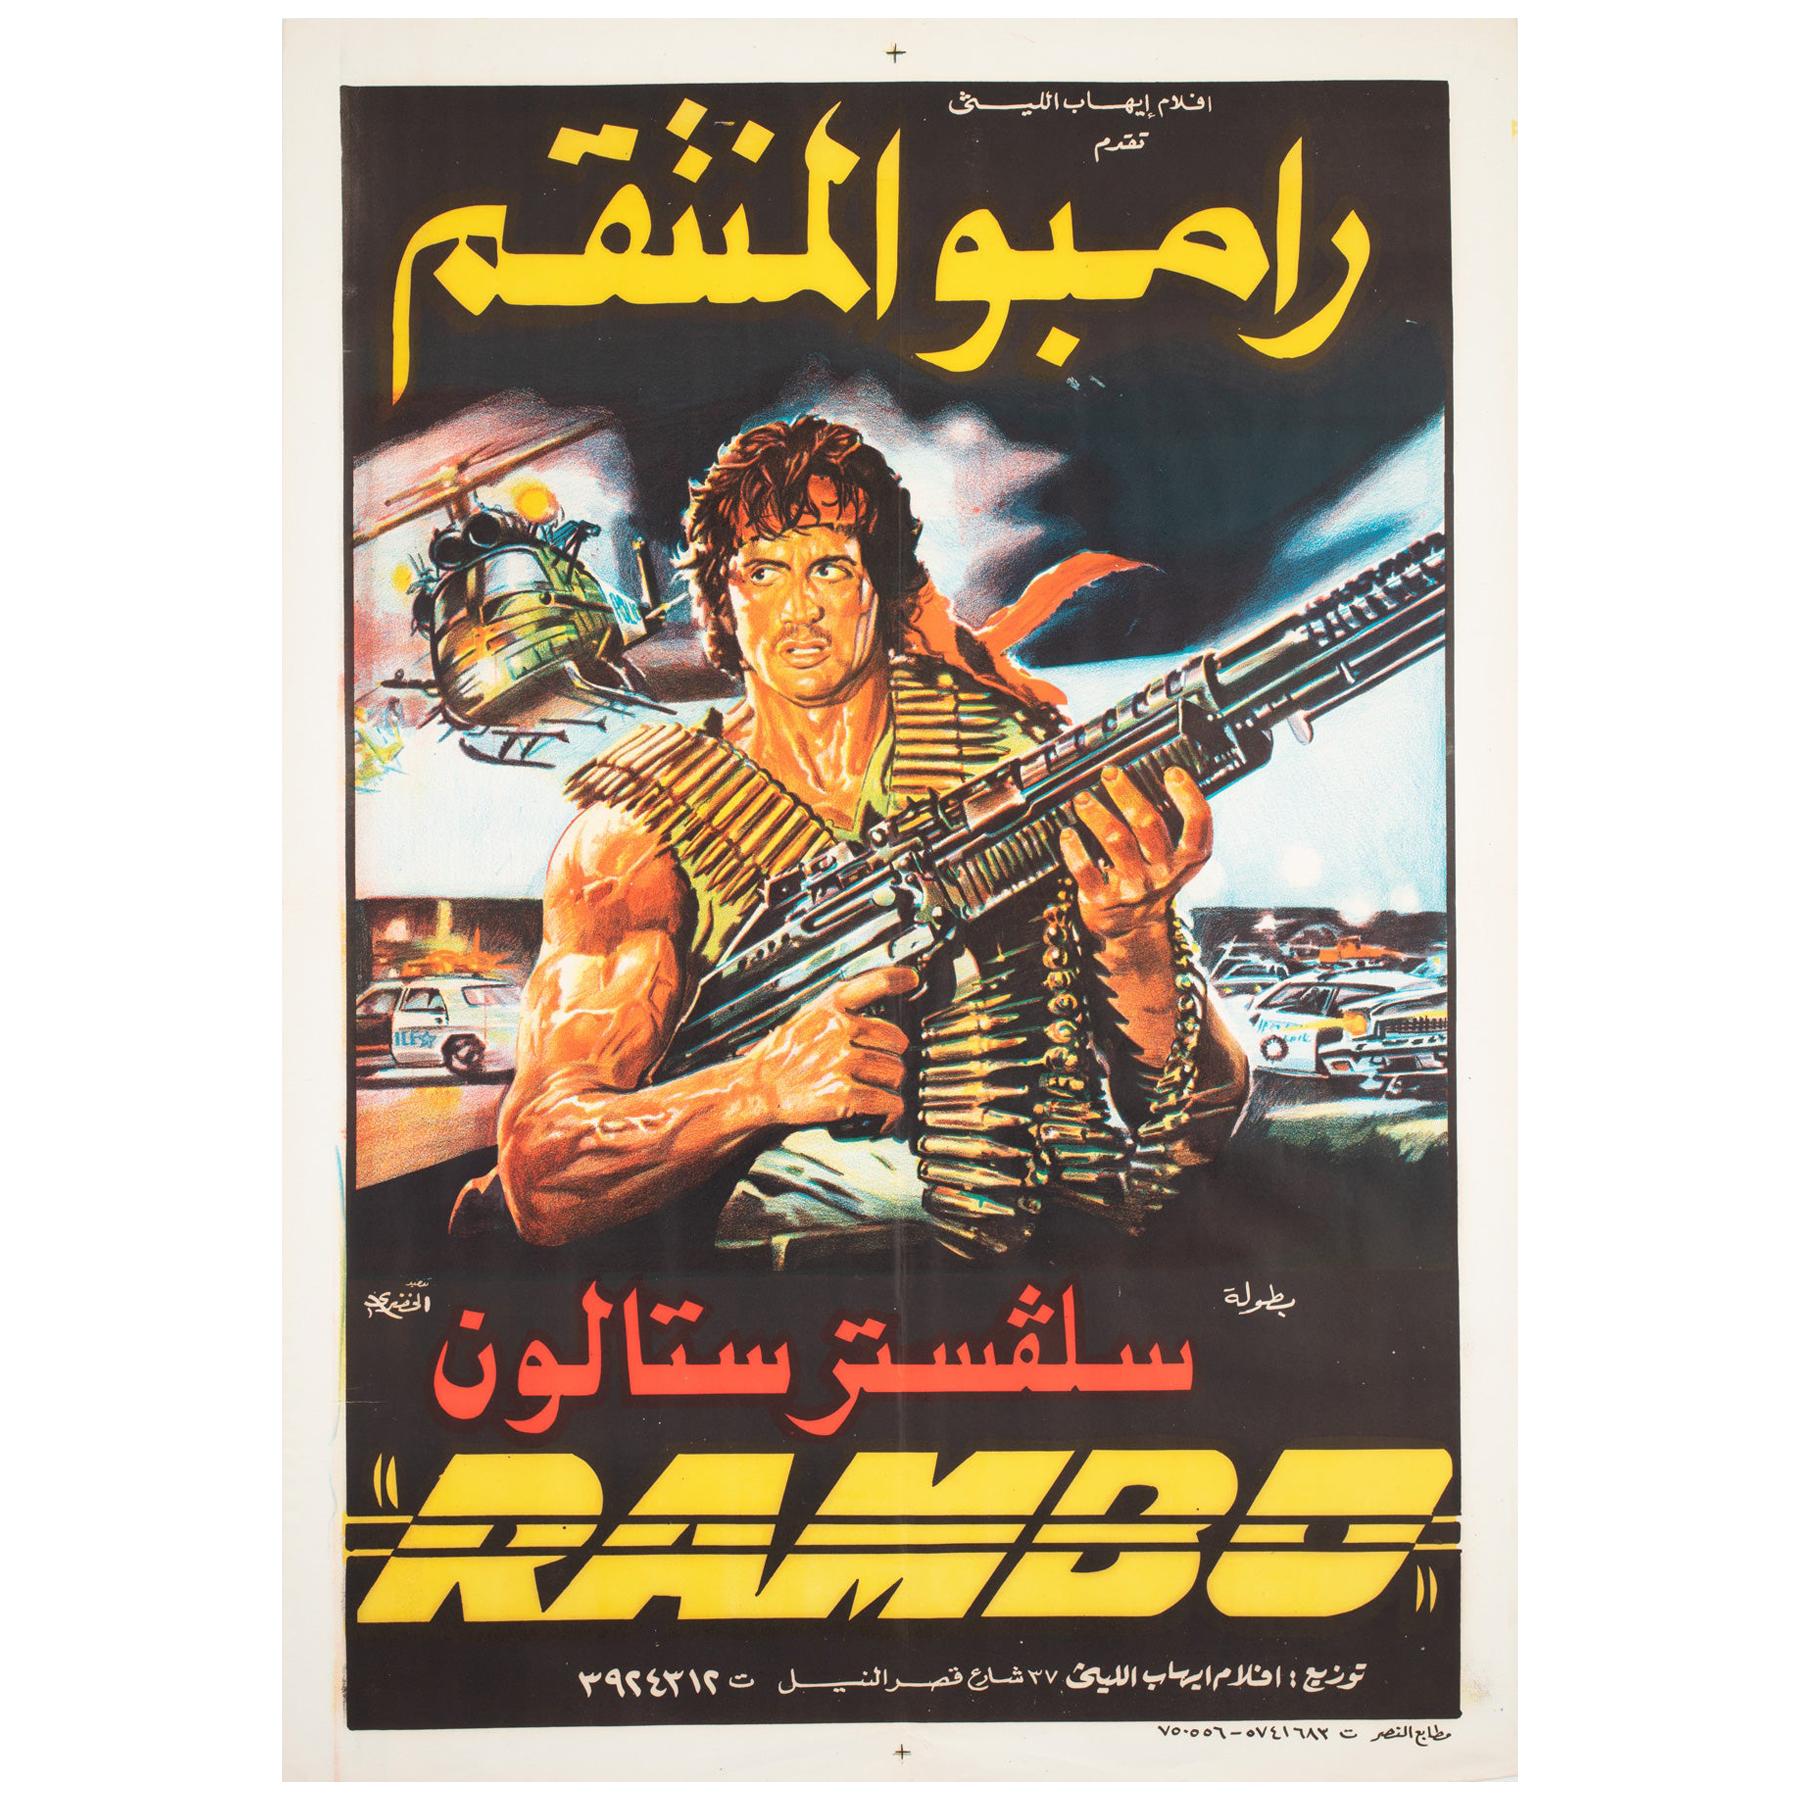 "Rambo First Blood", 1982 Egyptian Film Movie Poster